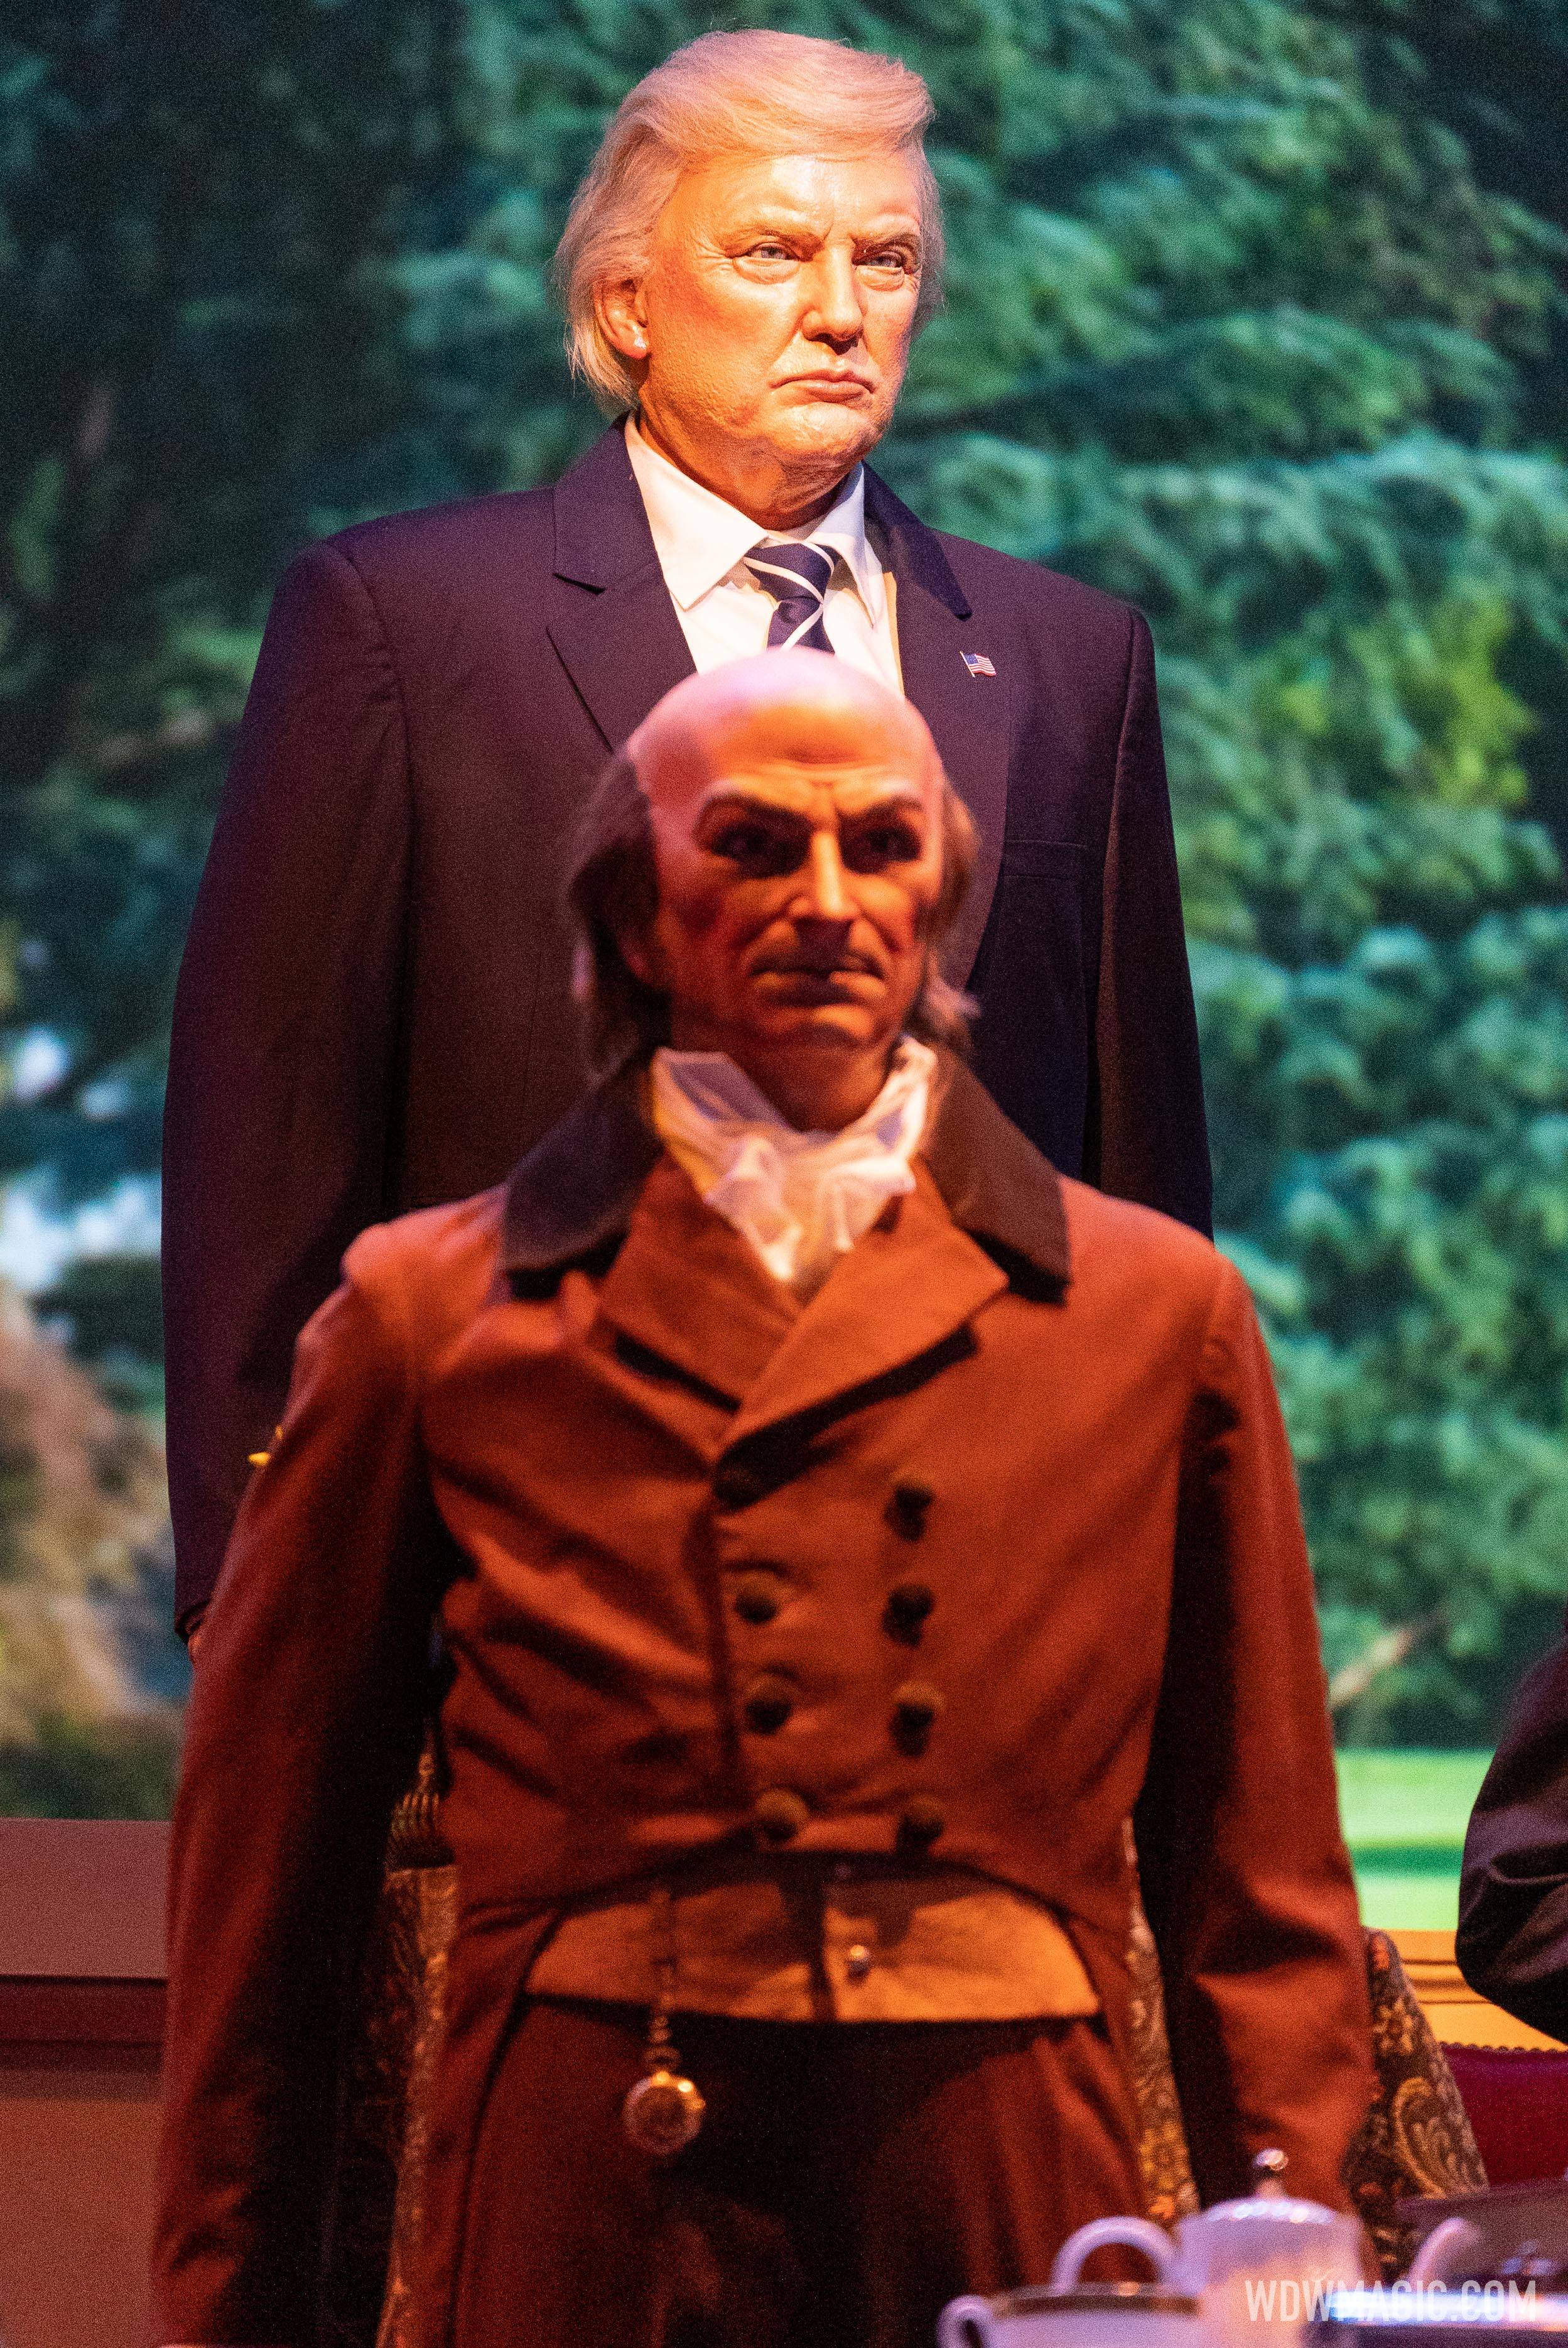 Donald Trump in new location in Hall of Presidents